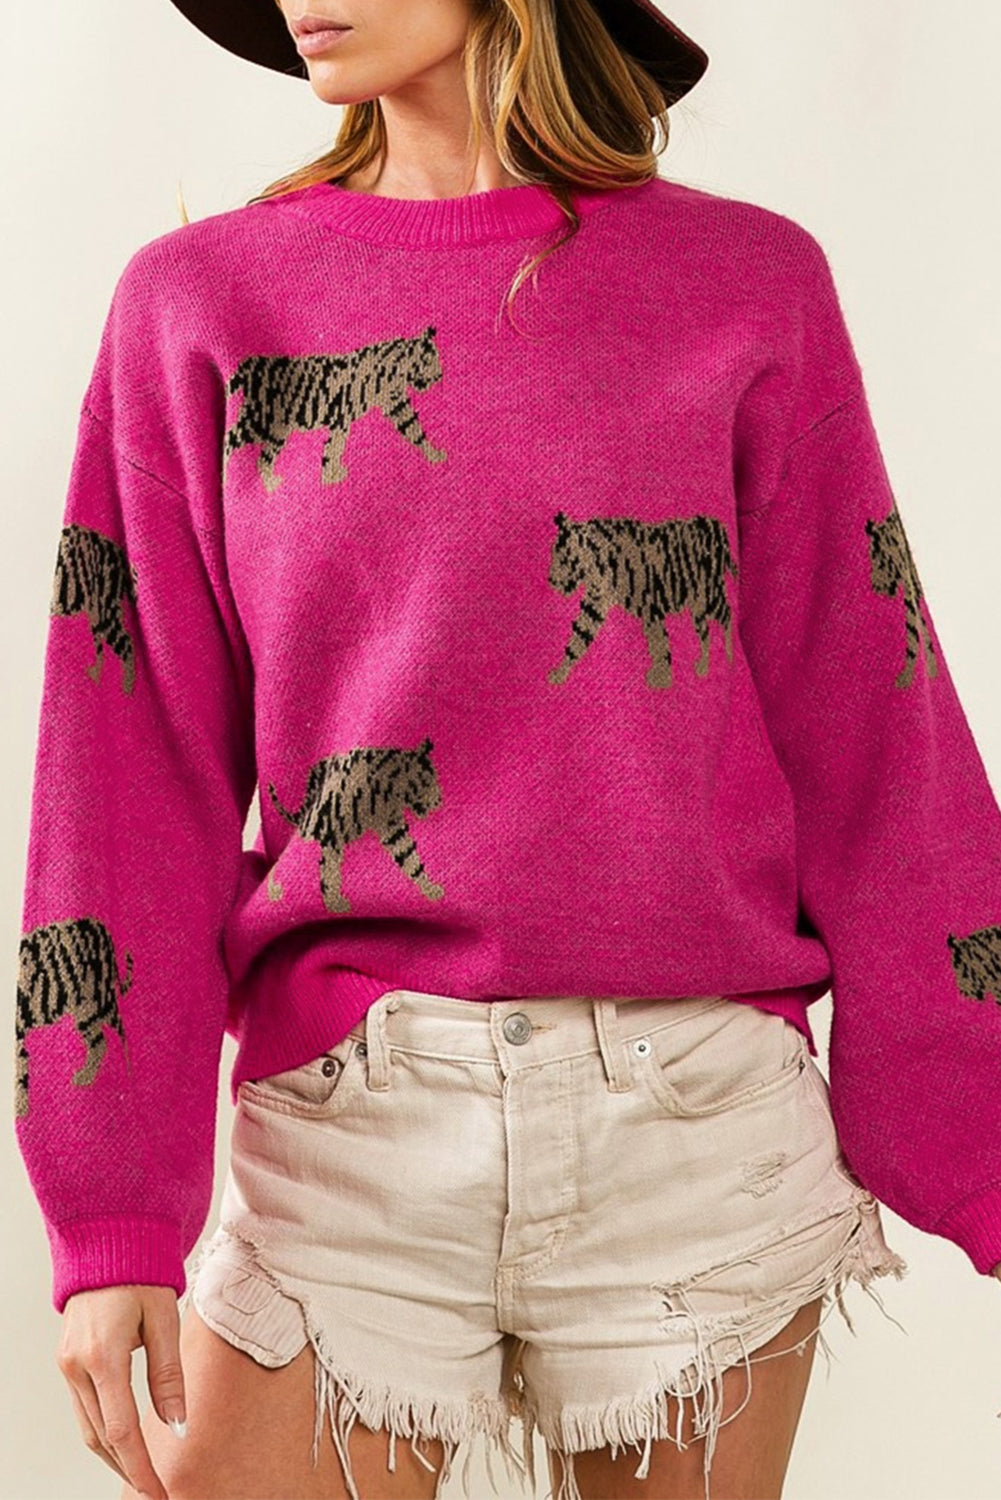 Rose red fierce animal pattern casual knitted sweater - l / 48% acrylic + 32% polyamide + 20% polyester - sweaters &